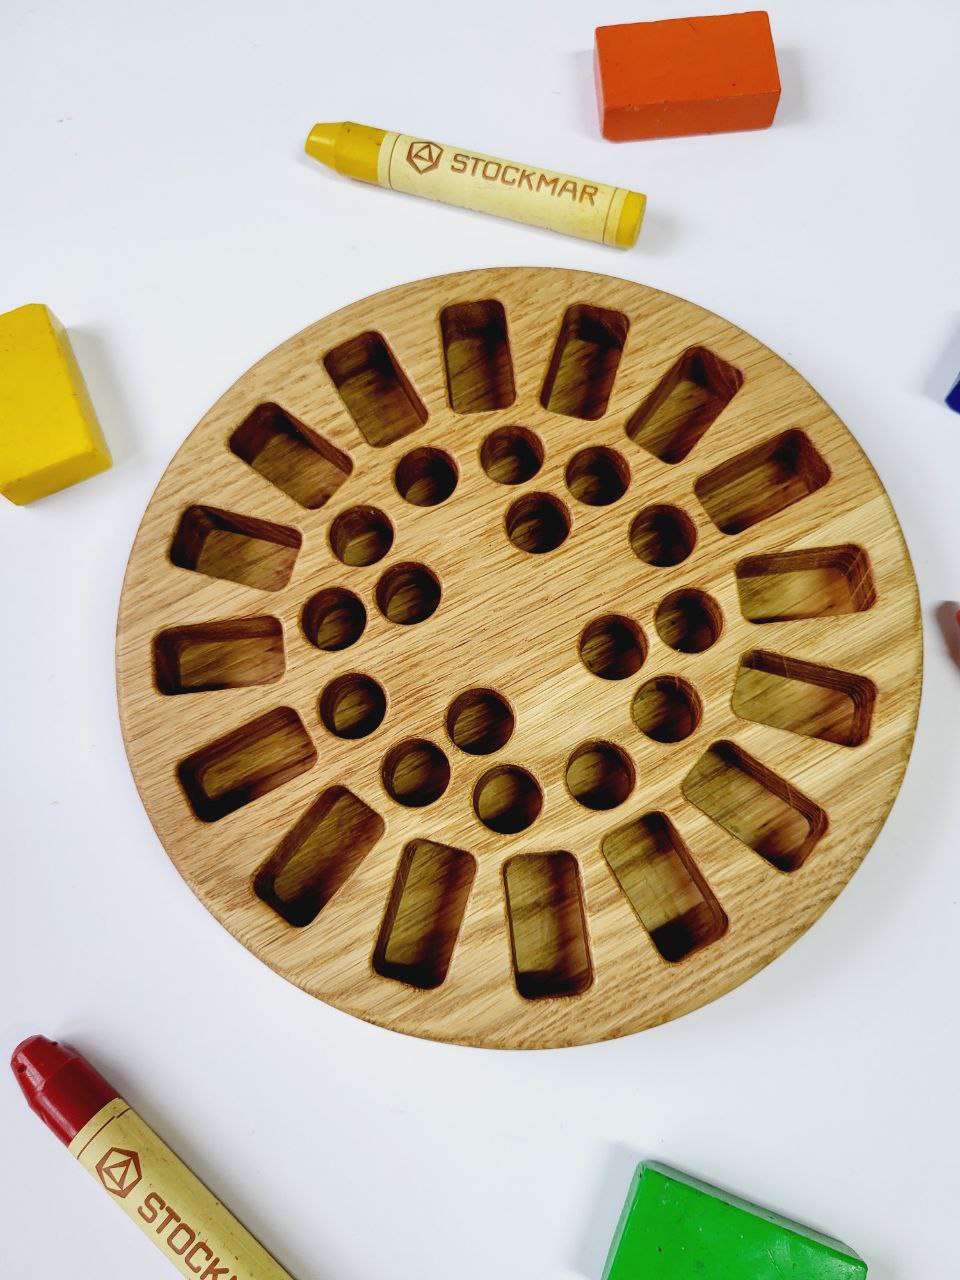 Waldorf Crayon holder for Stockmar 16 Blocks and 16 Sticks, ROUND without crayons